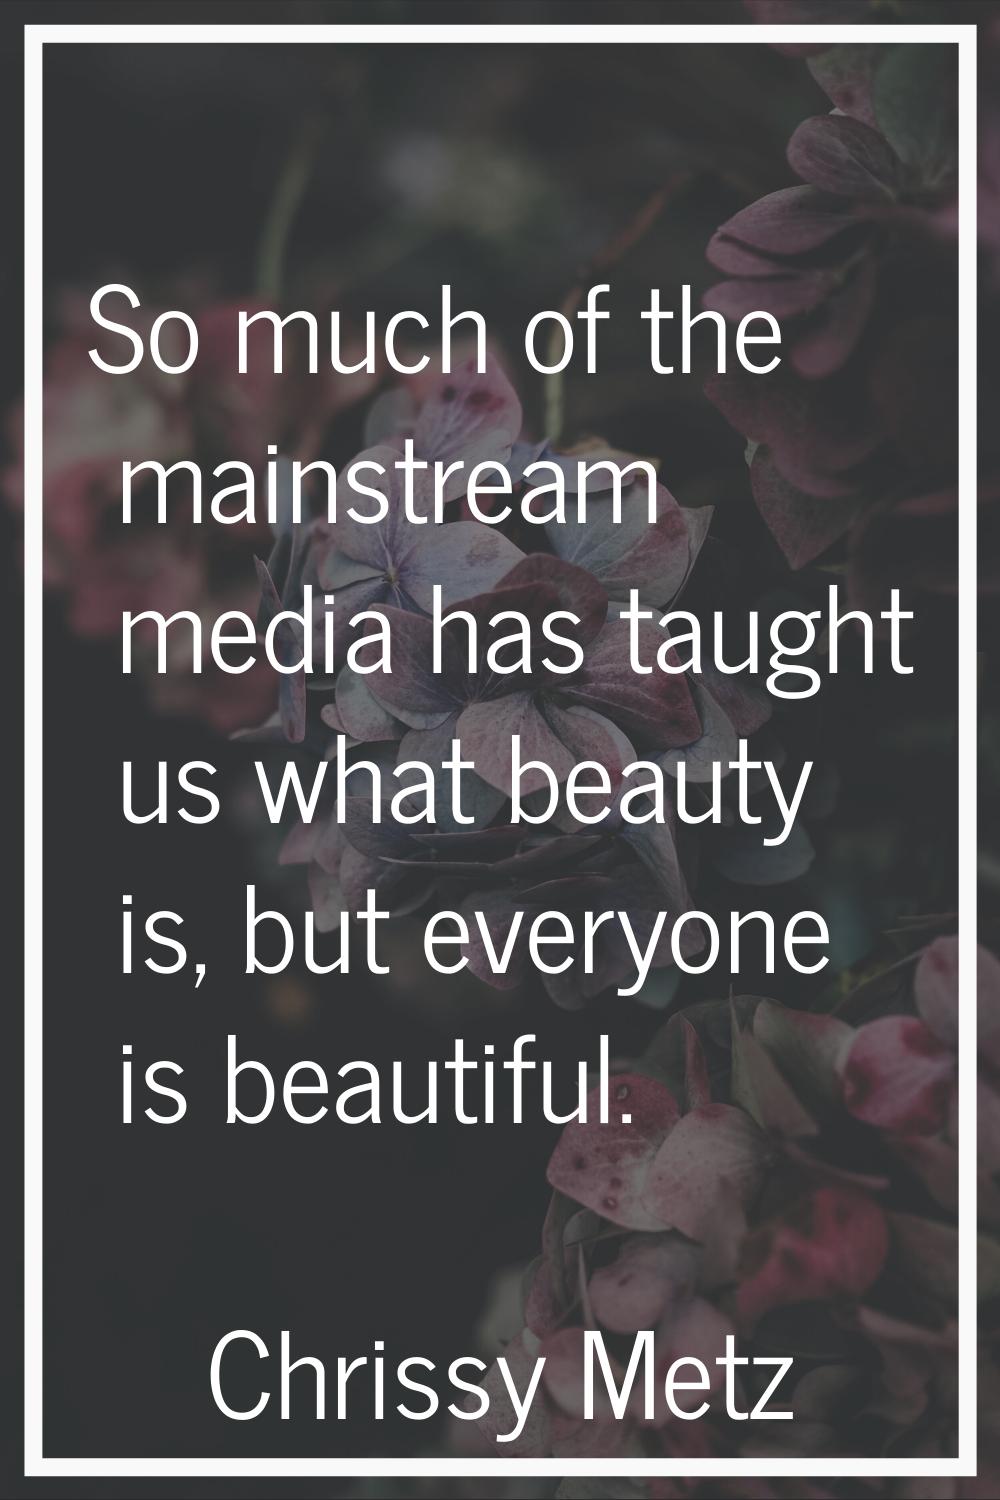 So much of the mainstream media has taught us what beauty is, but everyone is beautiful.